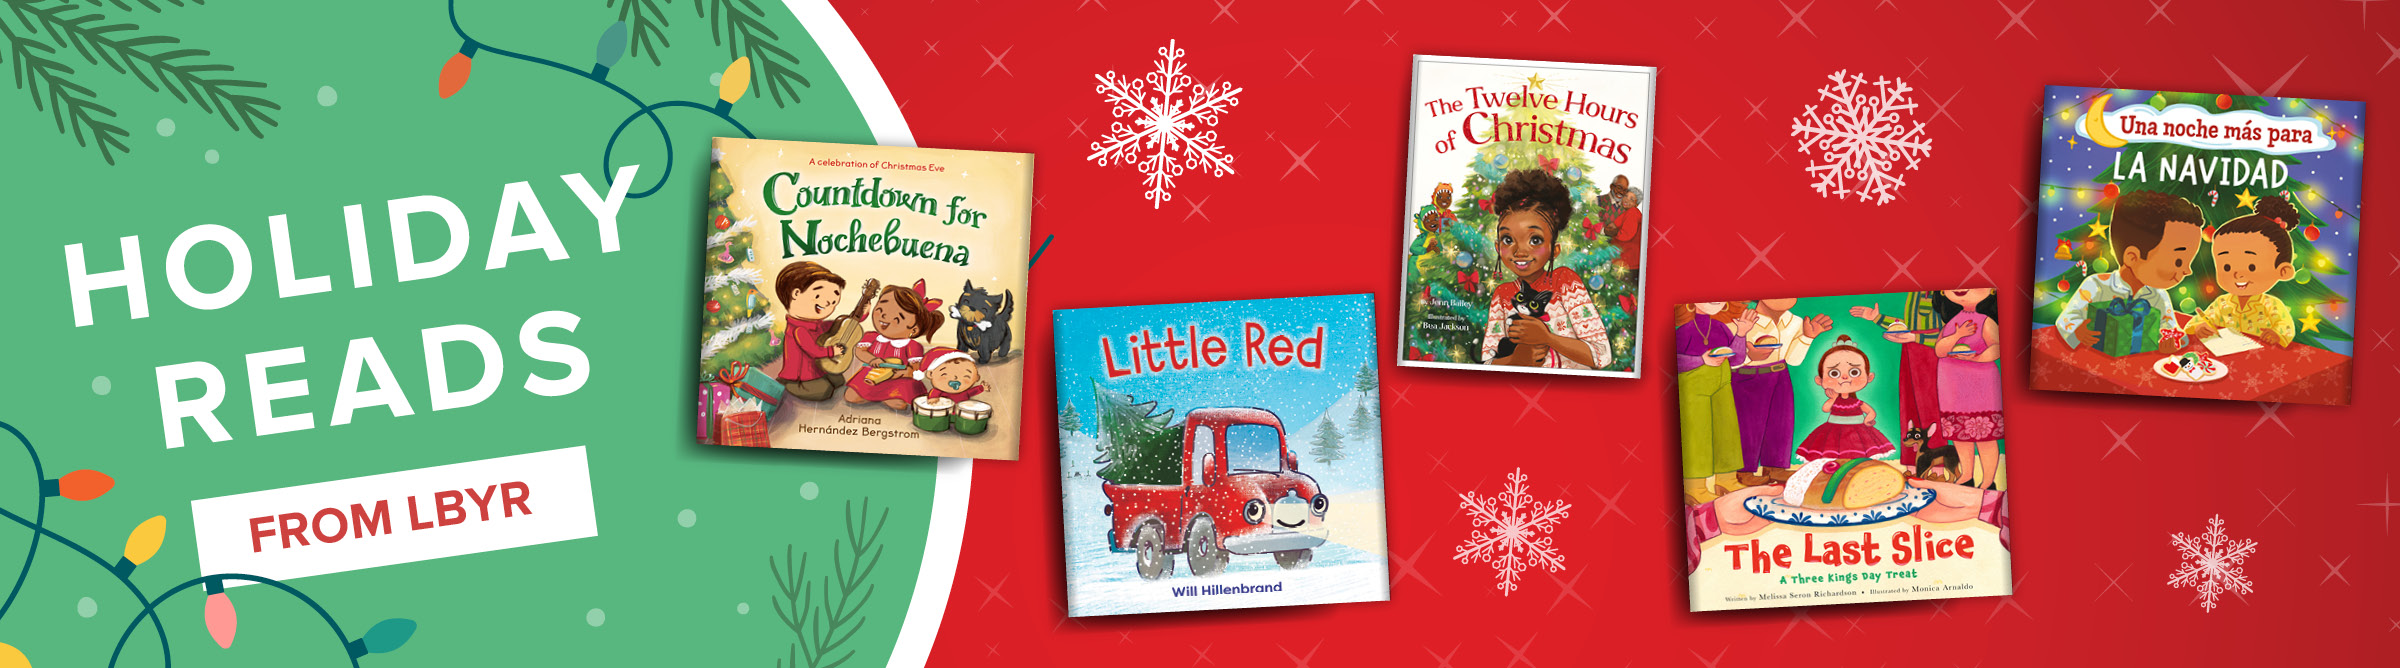 Graphic banner that says "Holiday Reads from LBYR" with book cover images for 'Countdown for Nochebuena,' 'Little Red,' 'The Twelves Hours of Christmas,' 'The Last Slice' and 'Una Noche Mas Para La Navidad.' 